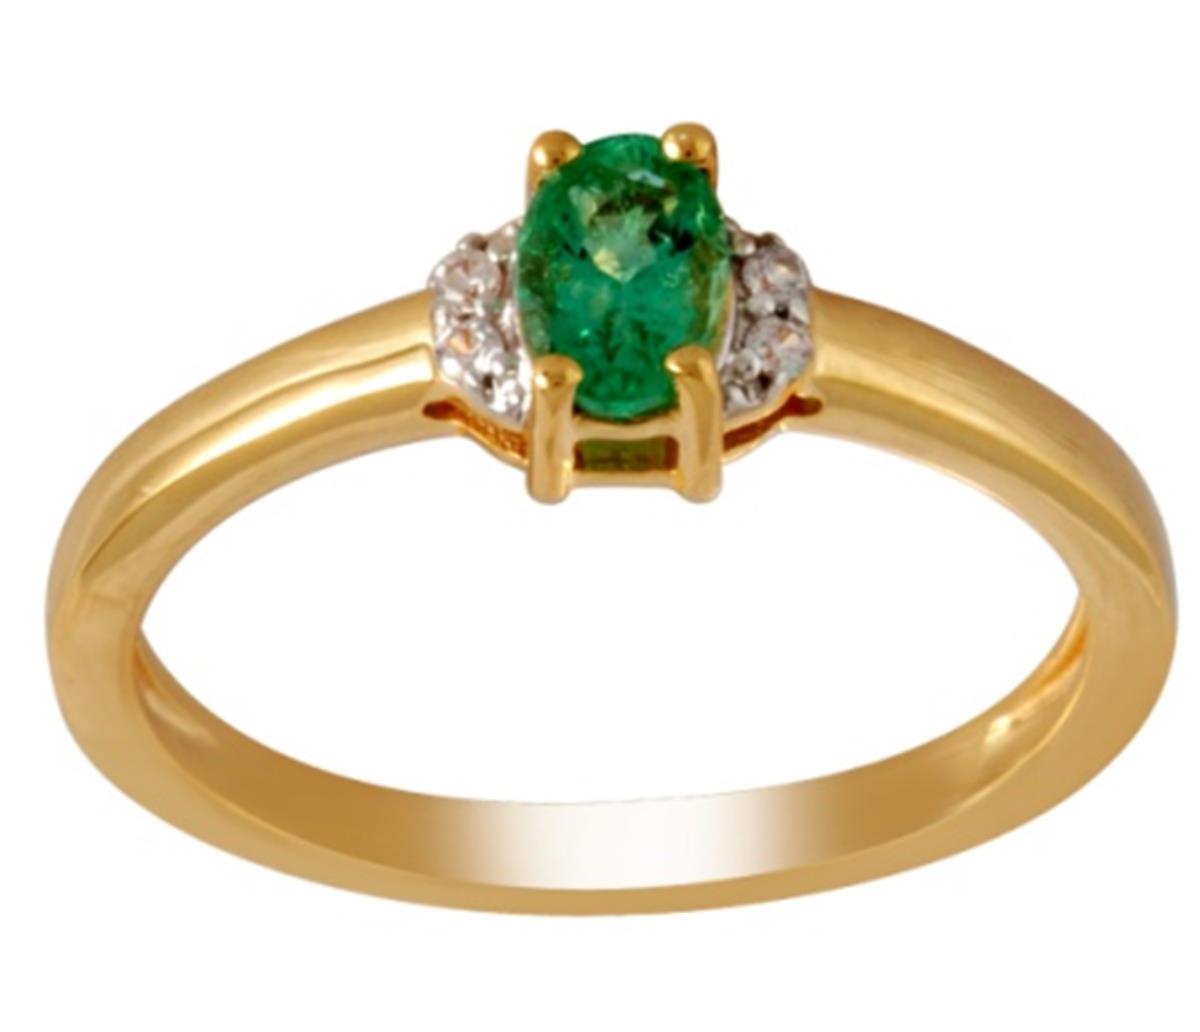 10K Yellow Gold 6x4mm Zambia Light Emerald Oval Cut with White Rd Zircon Sides Ring